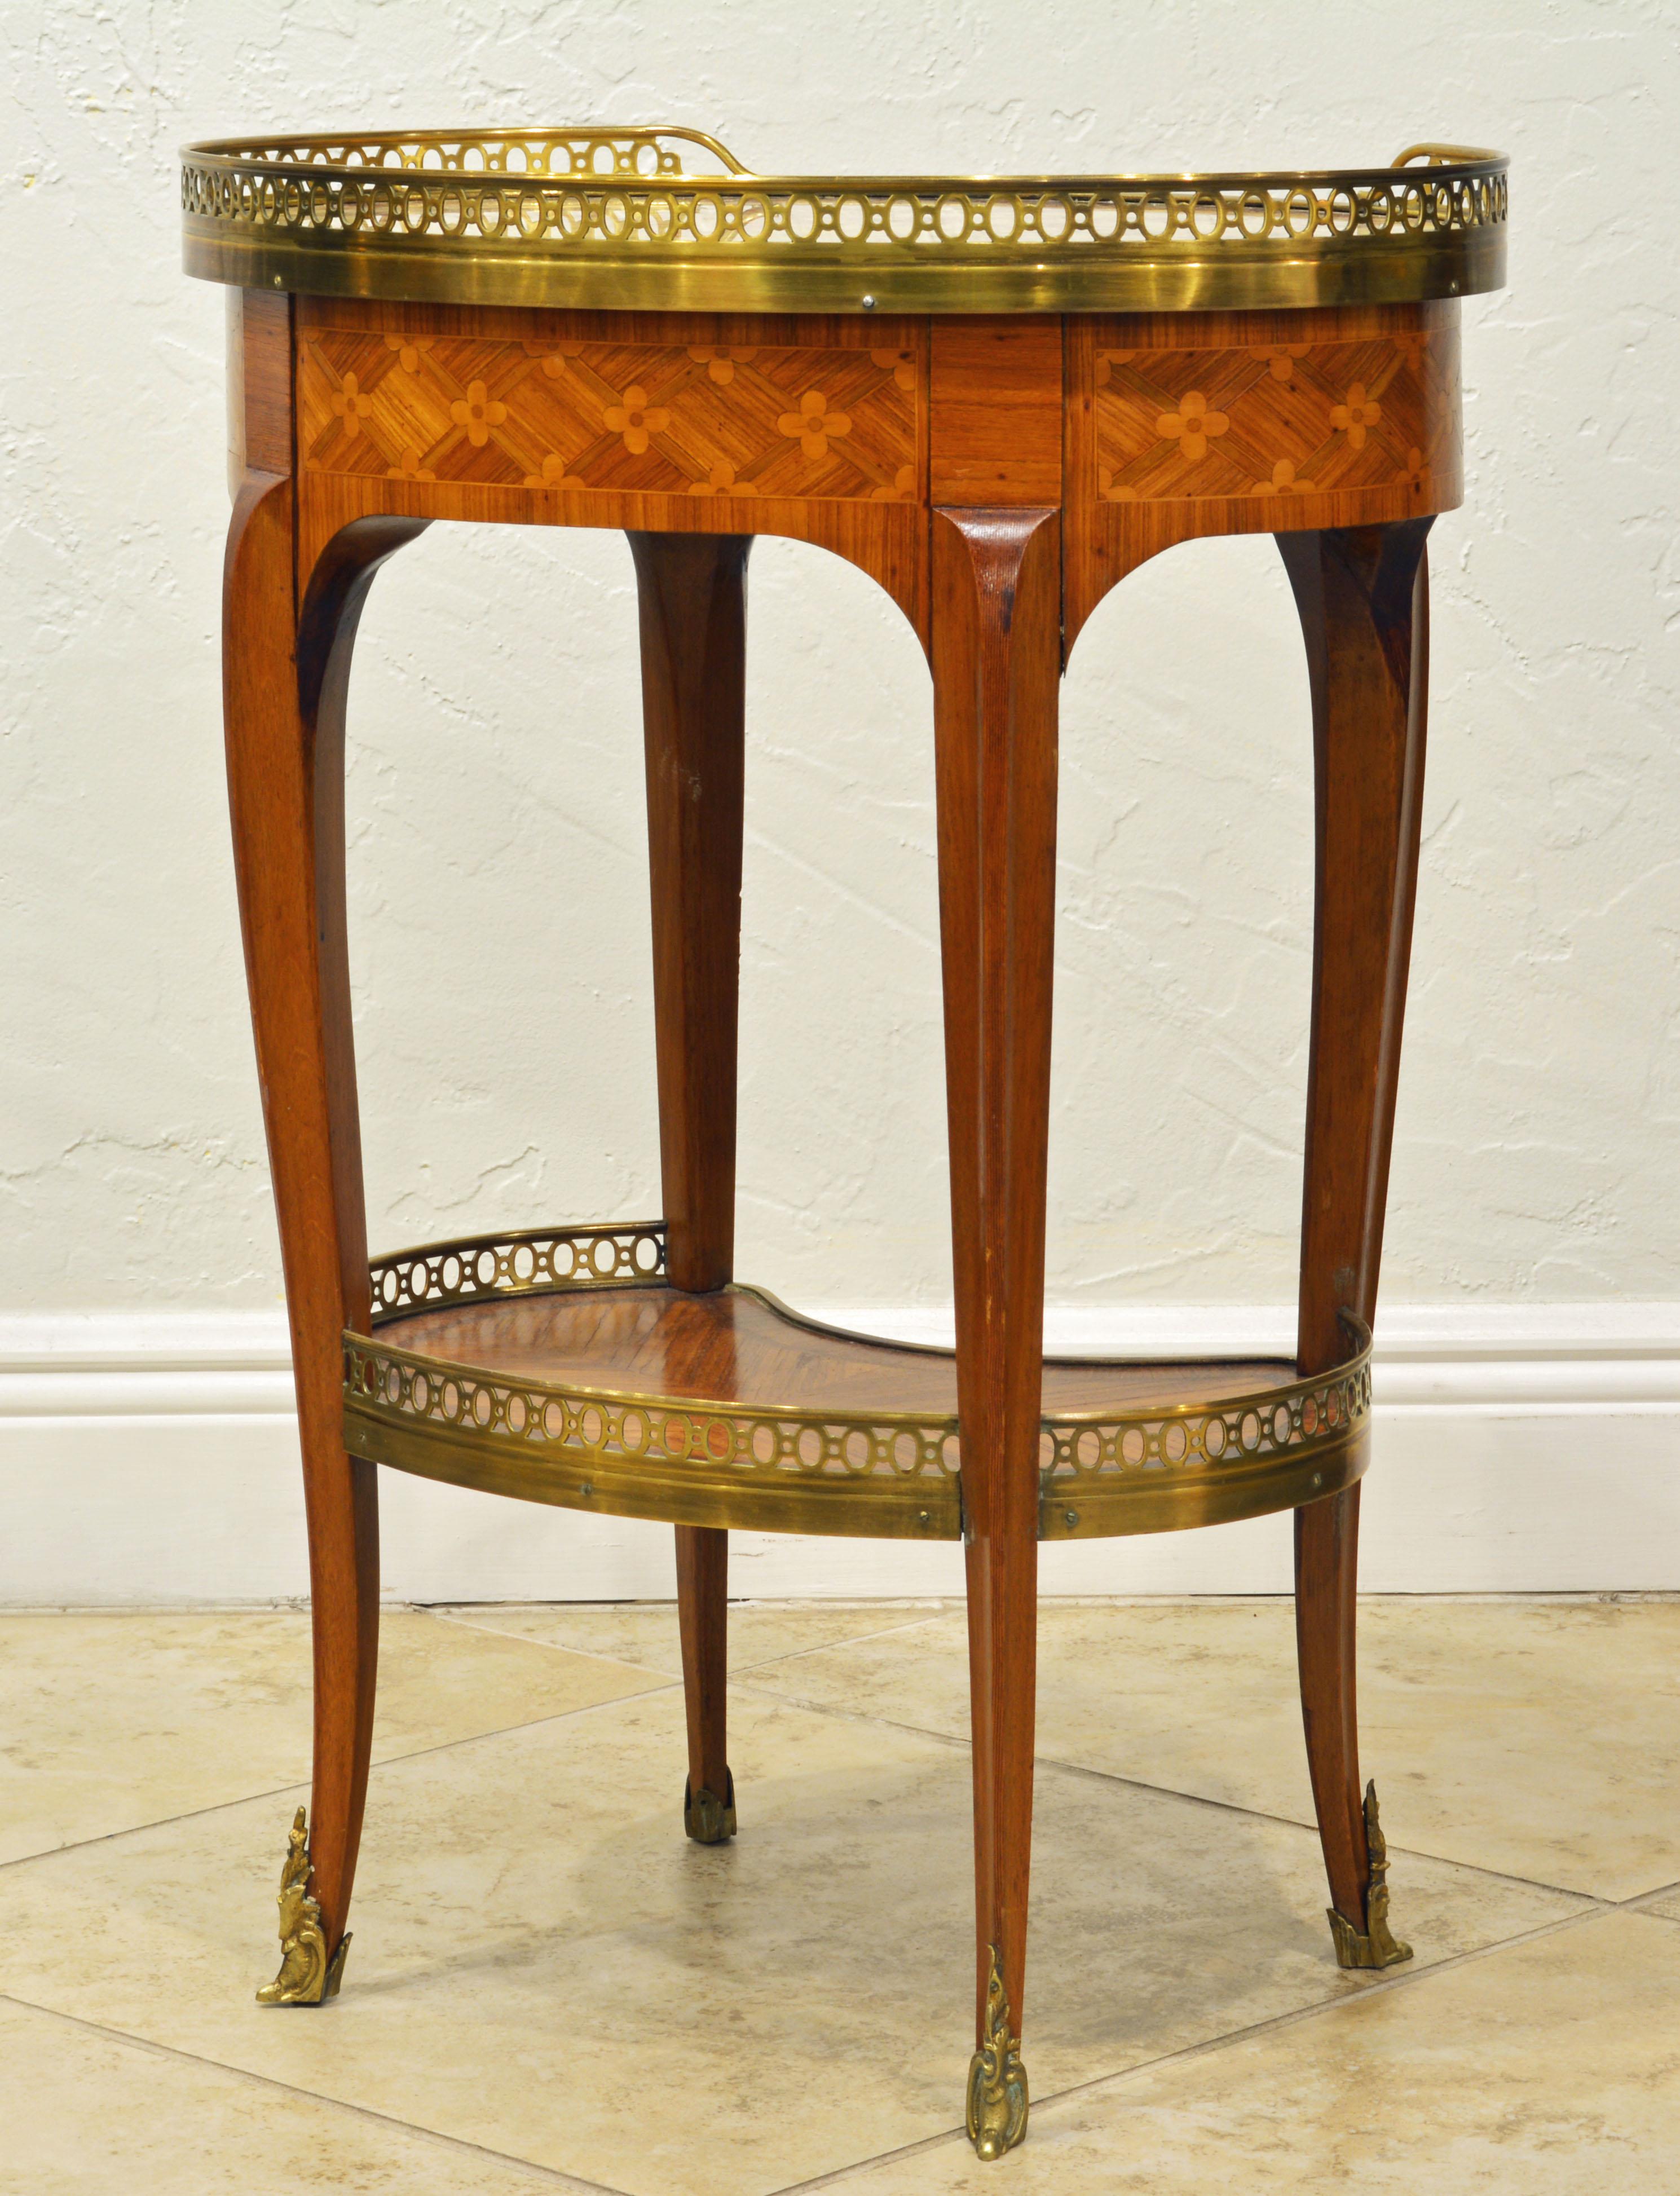 Parquetry French Kidney Shape Mable top and parquetry Two Tier Side Table